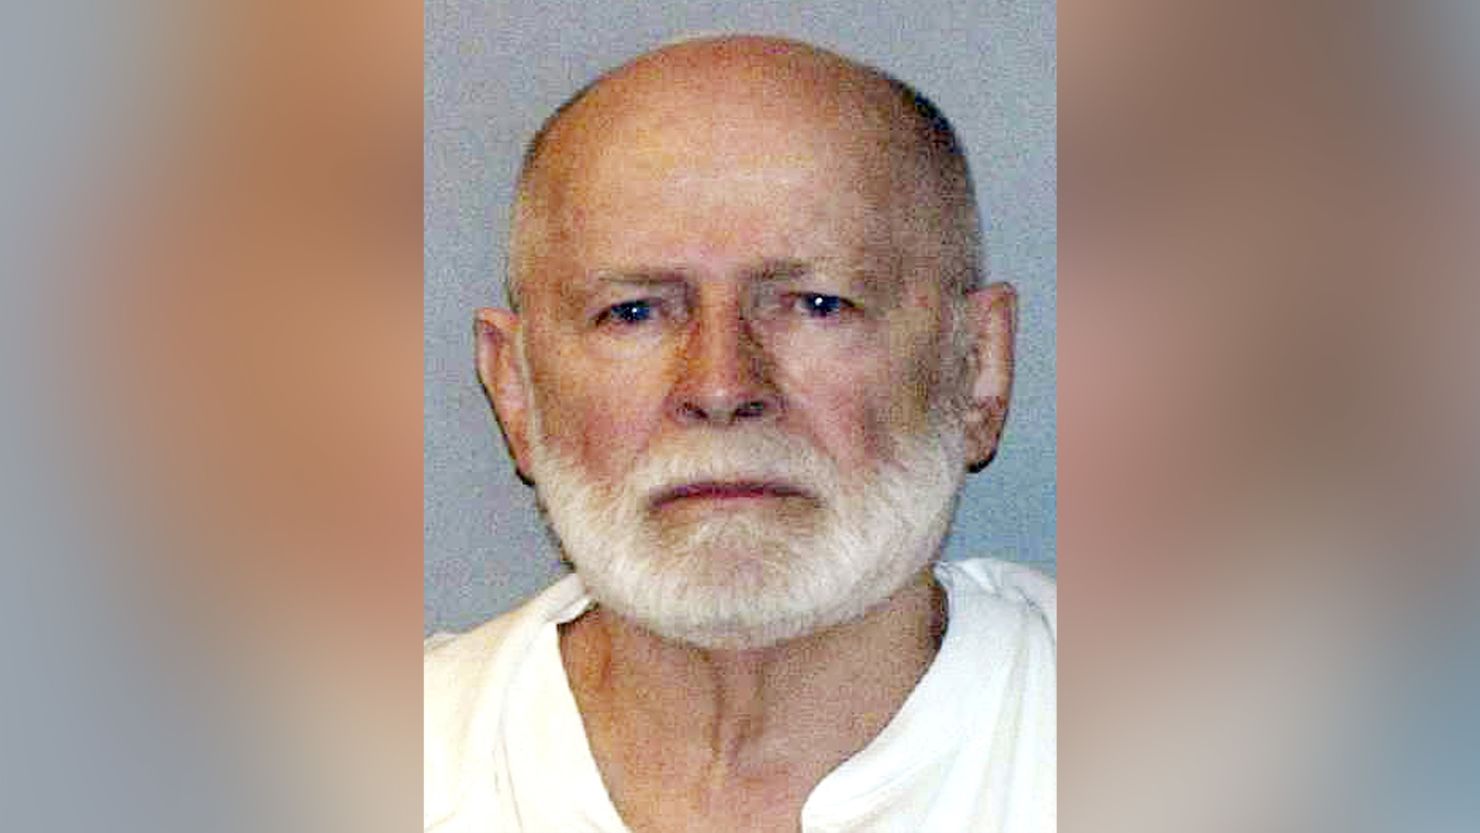 James "Whitey" Bulger, shown in this June 2011 booking photo, was killed just hours after being transferred to the US Penitentiary Hazelton in West Virginia in 2018.